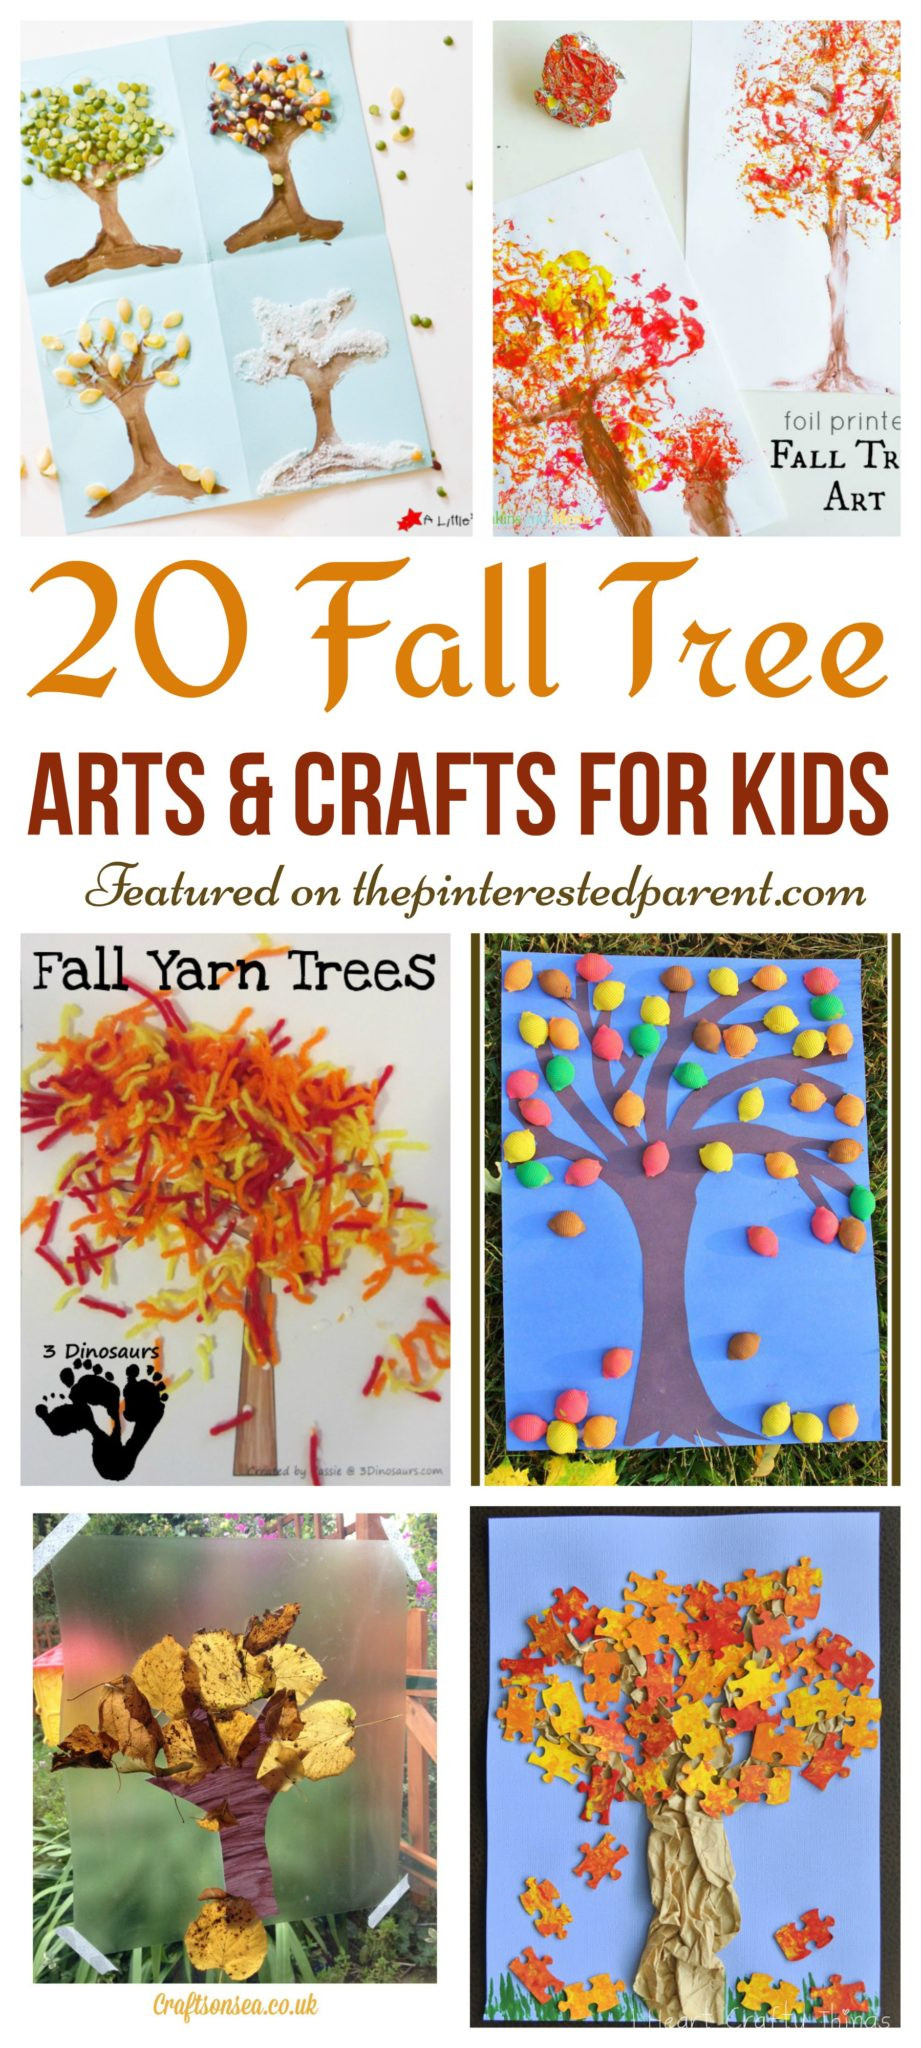 Art And Craft Activities For Preschoolers
 20 Fall Tree Arts & Crafts Ideas For Kids – The